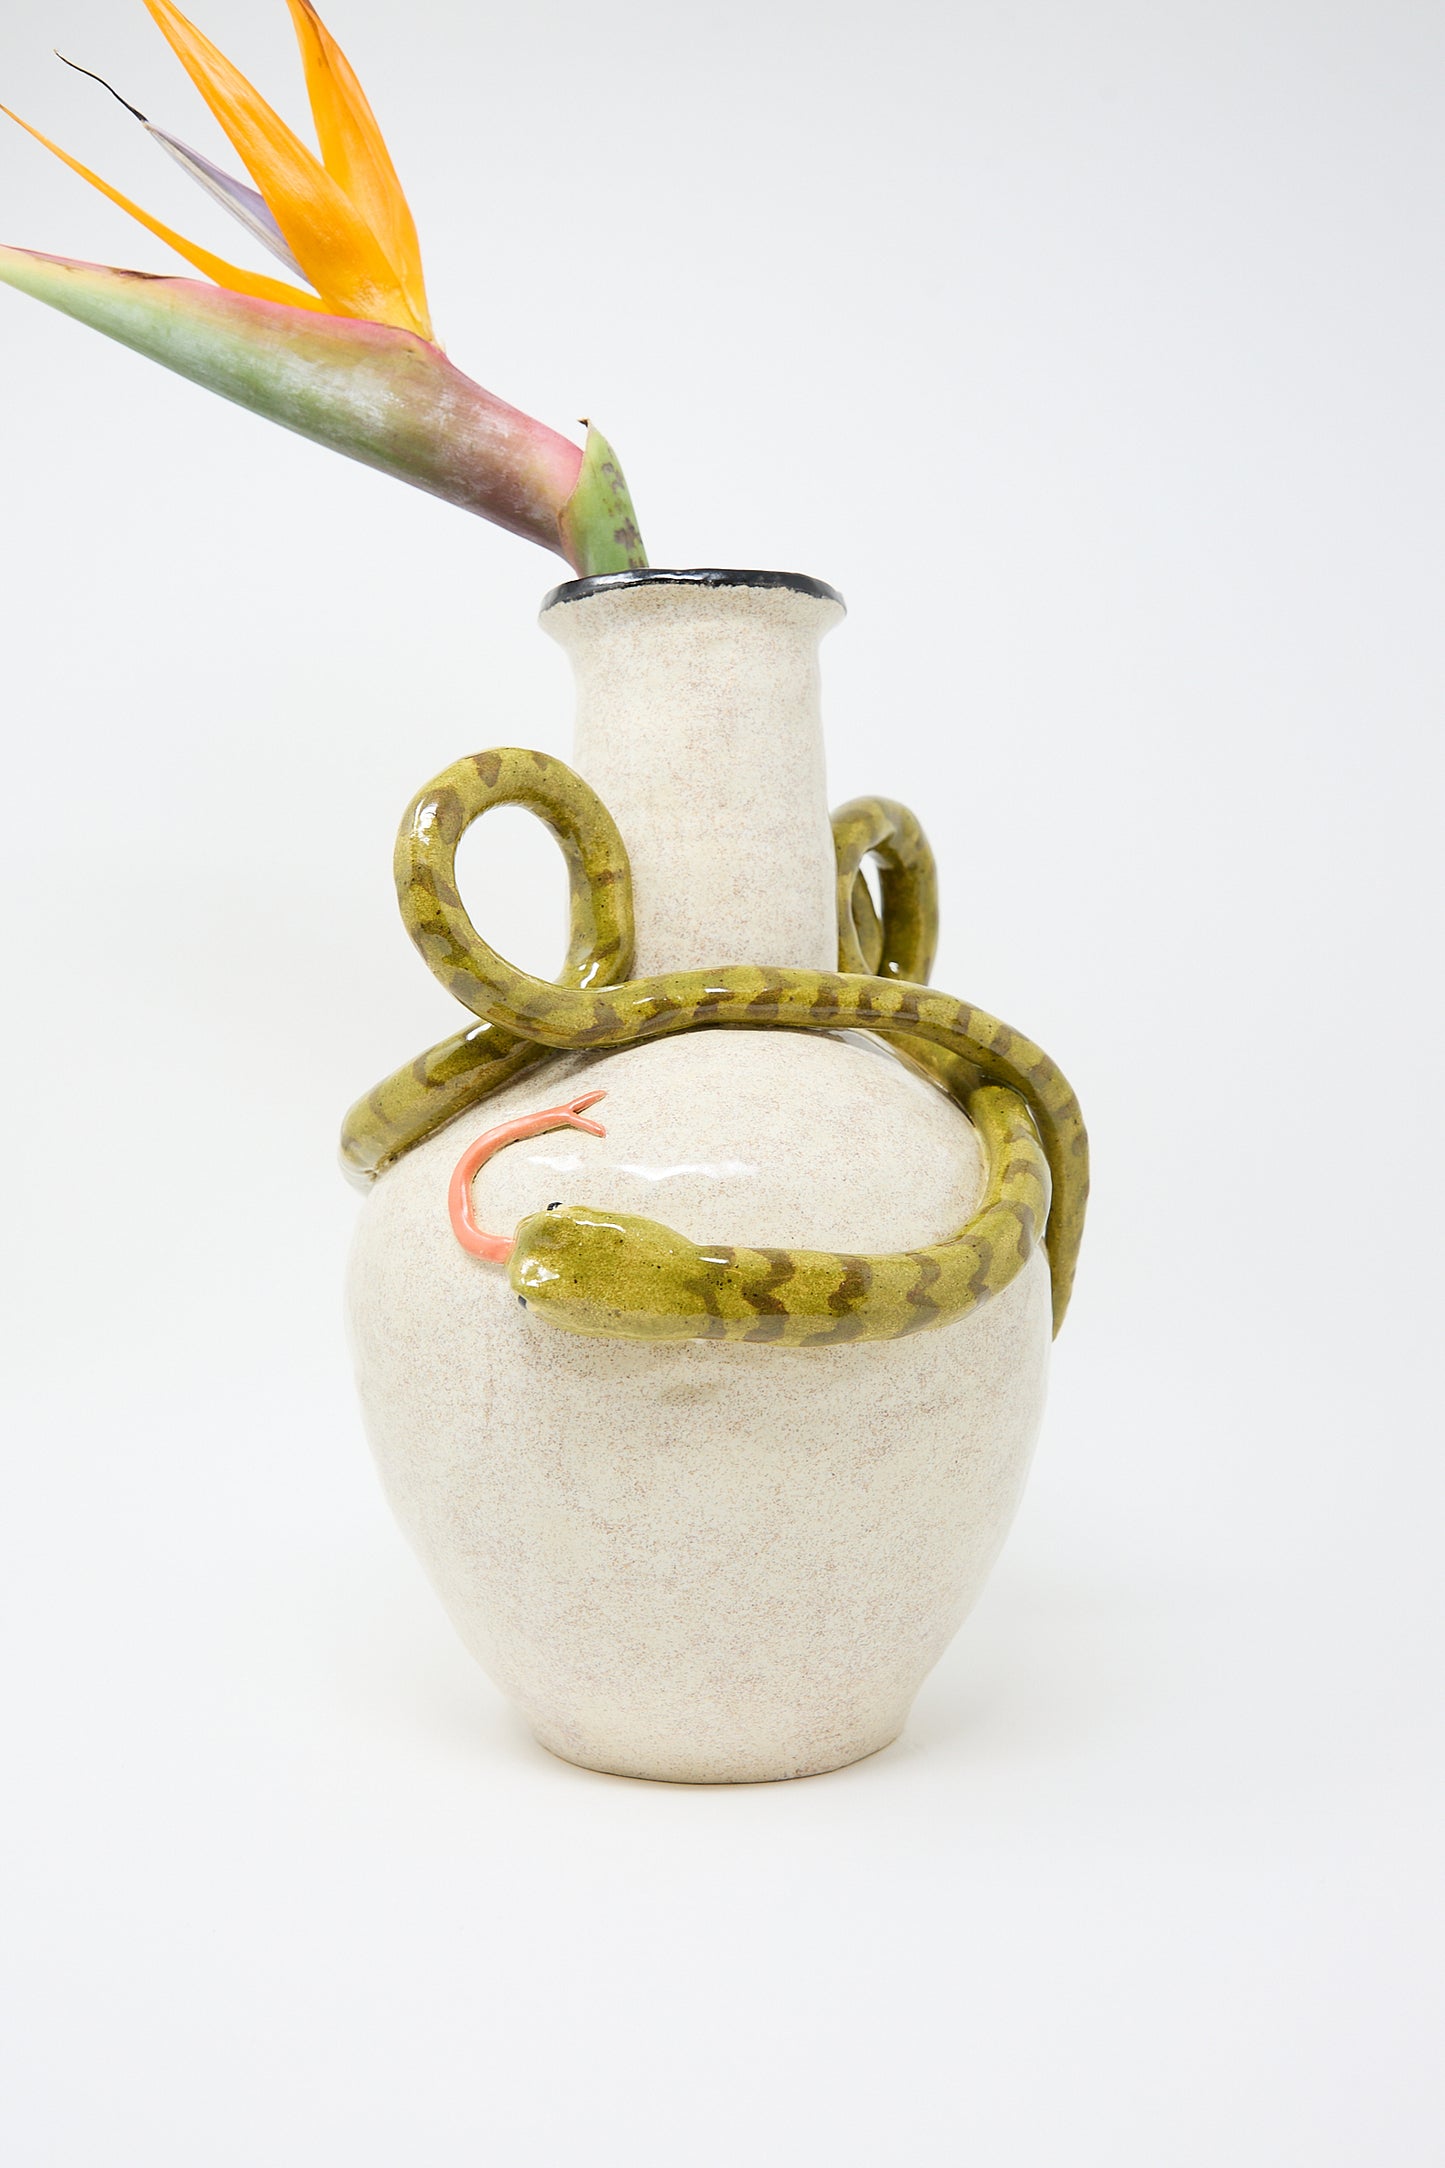 A glazed stoneware vase featuring a Snake Amphora Vase design wrapped around its neck, with a bird of paradise flower inserted at the top by Pearce Williams.